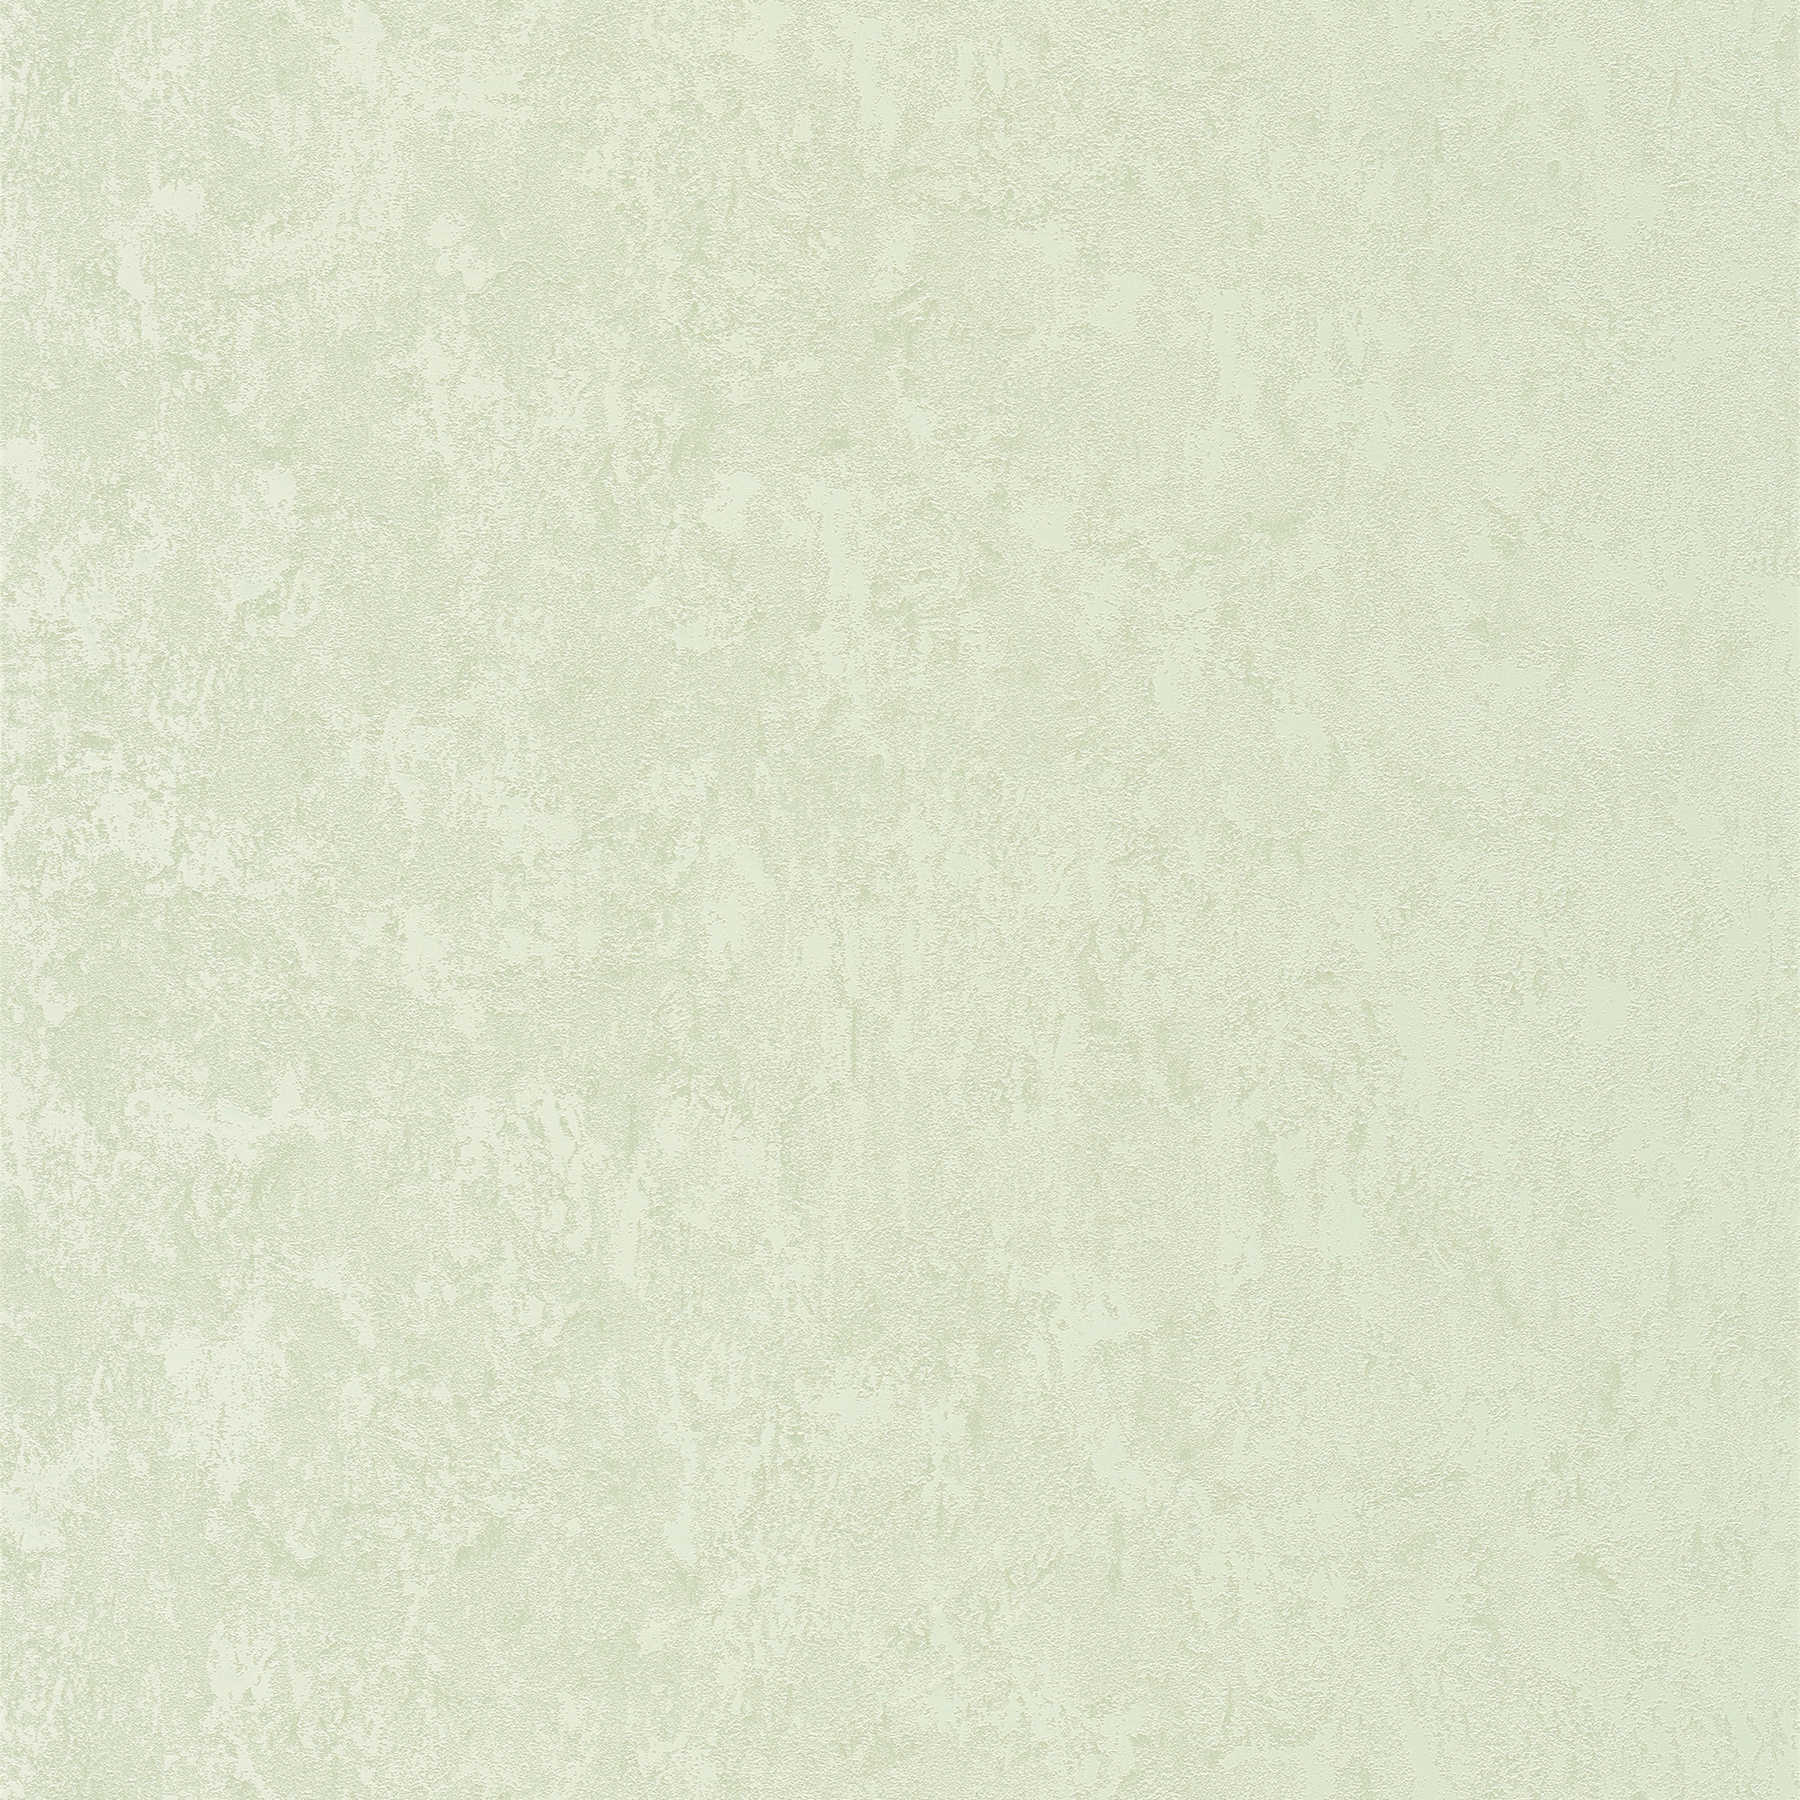 Metallic wallpaper light green glossy with structure embossing
